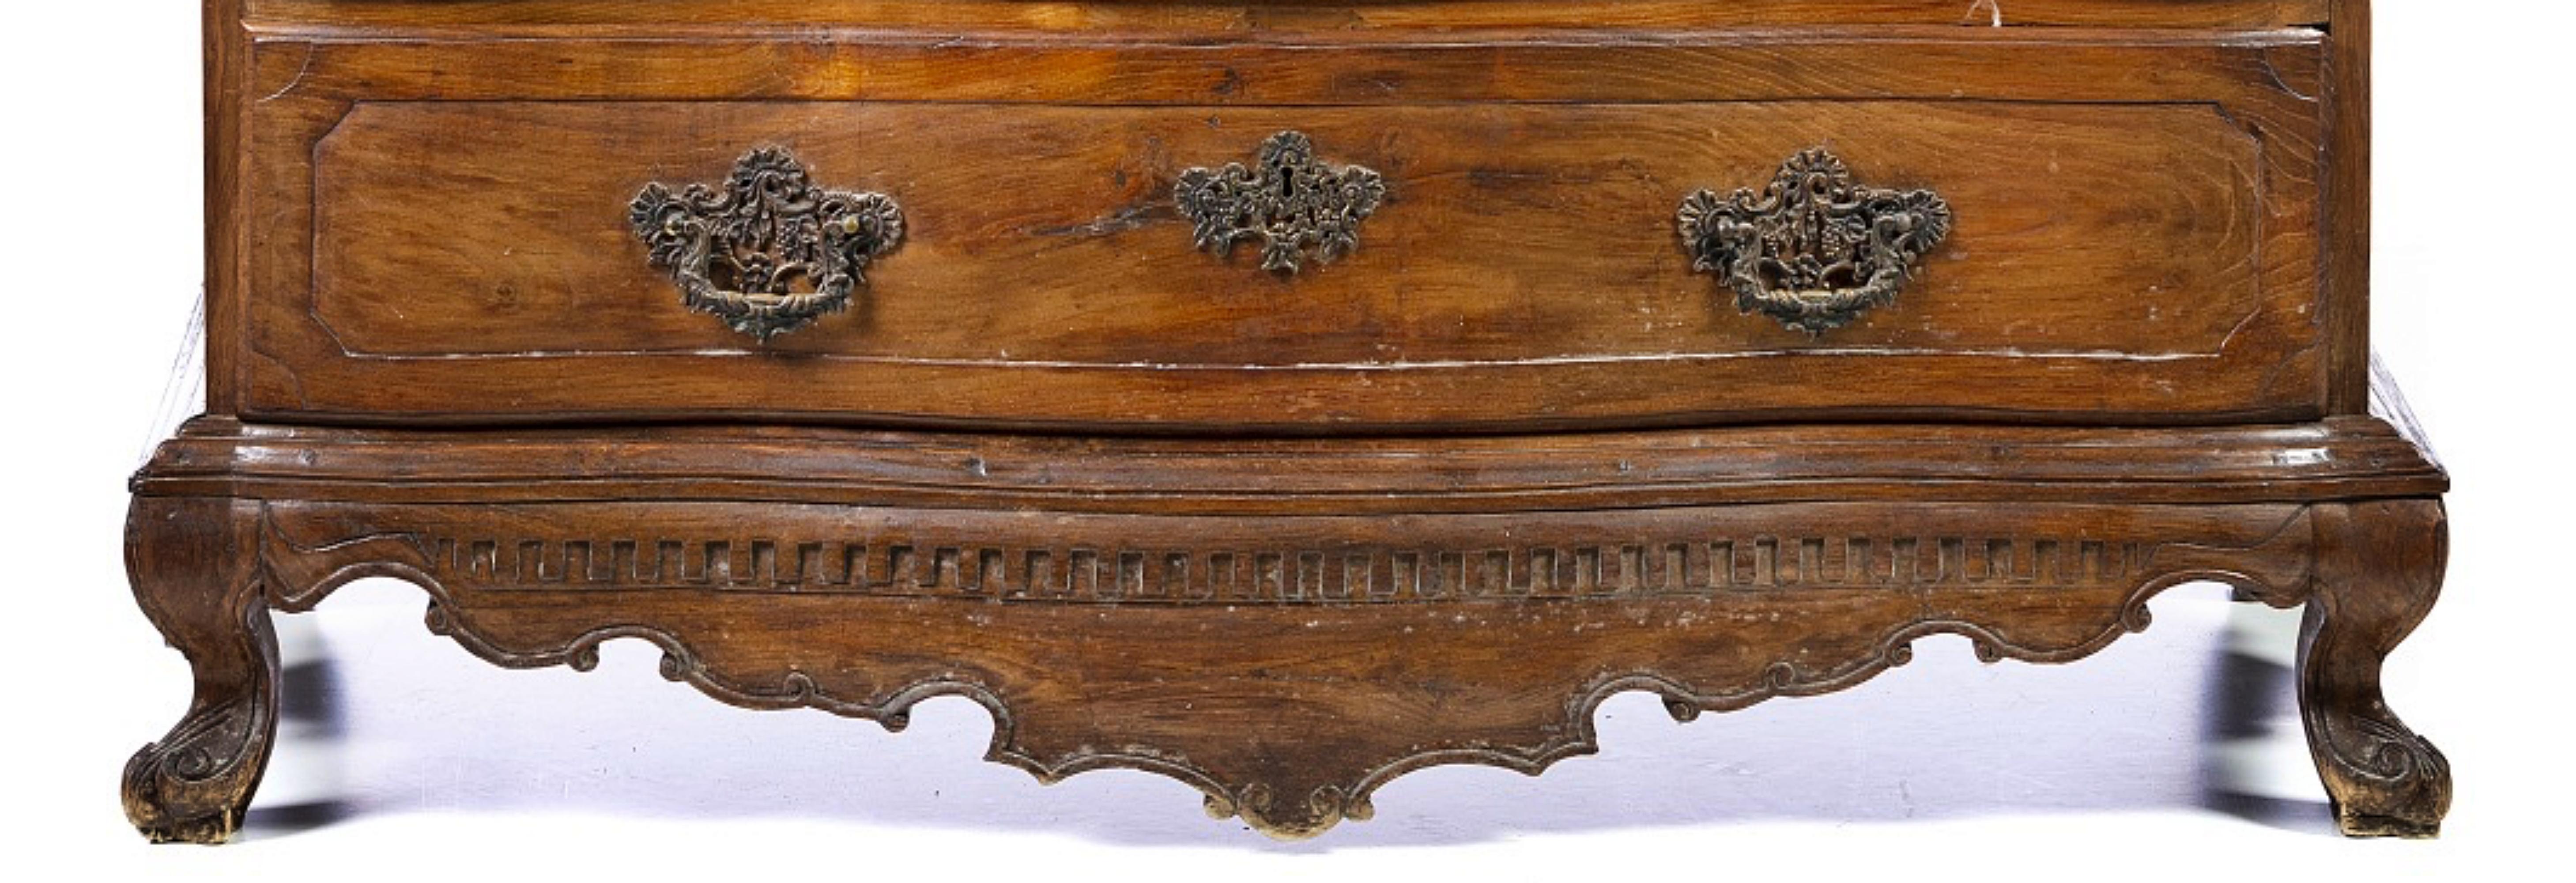 STATIONERY D. JOSÉ 18th Century

19th century Portuguese. 
in chestnut wood, with two drawers and three drawers. 
Folding lid with drawers and bins. 
Signs of use. Dim.: 140 x 115 x 62 cm.